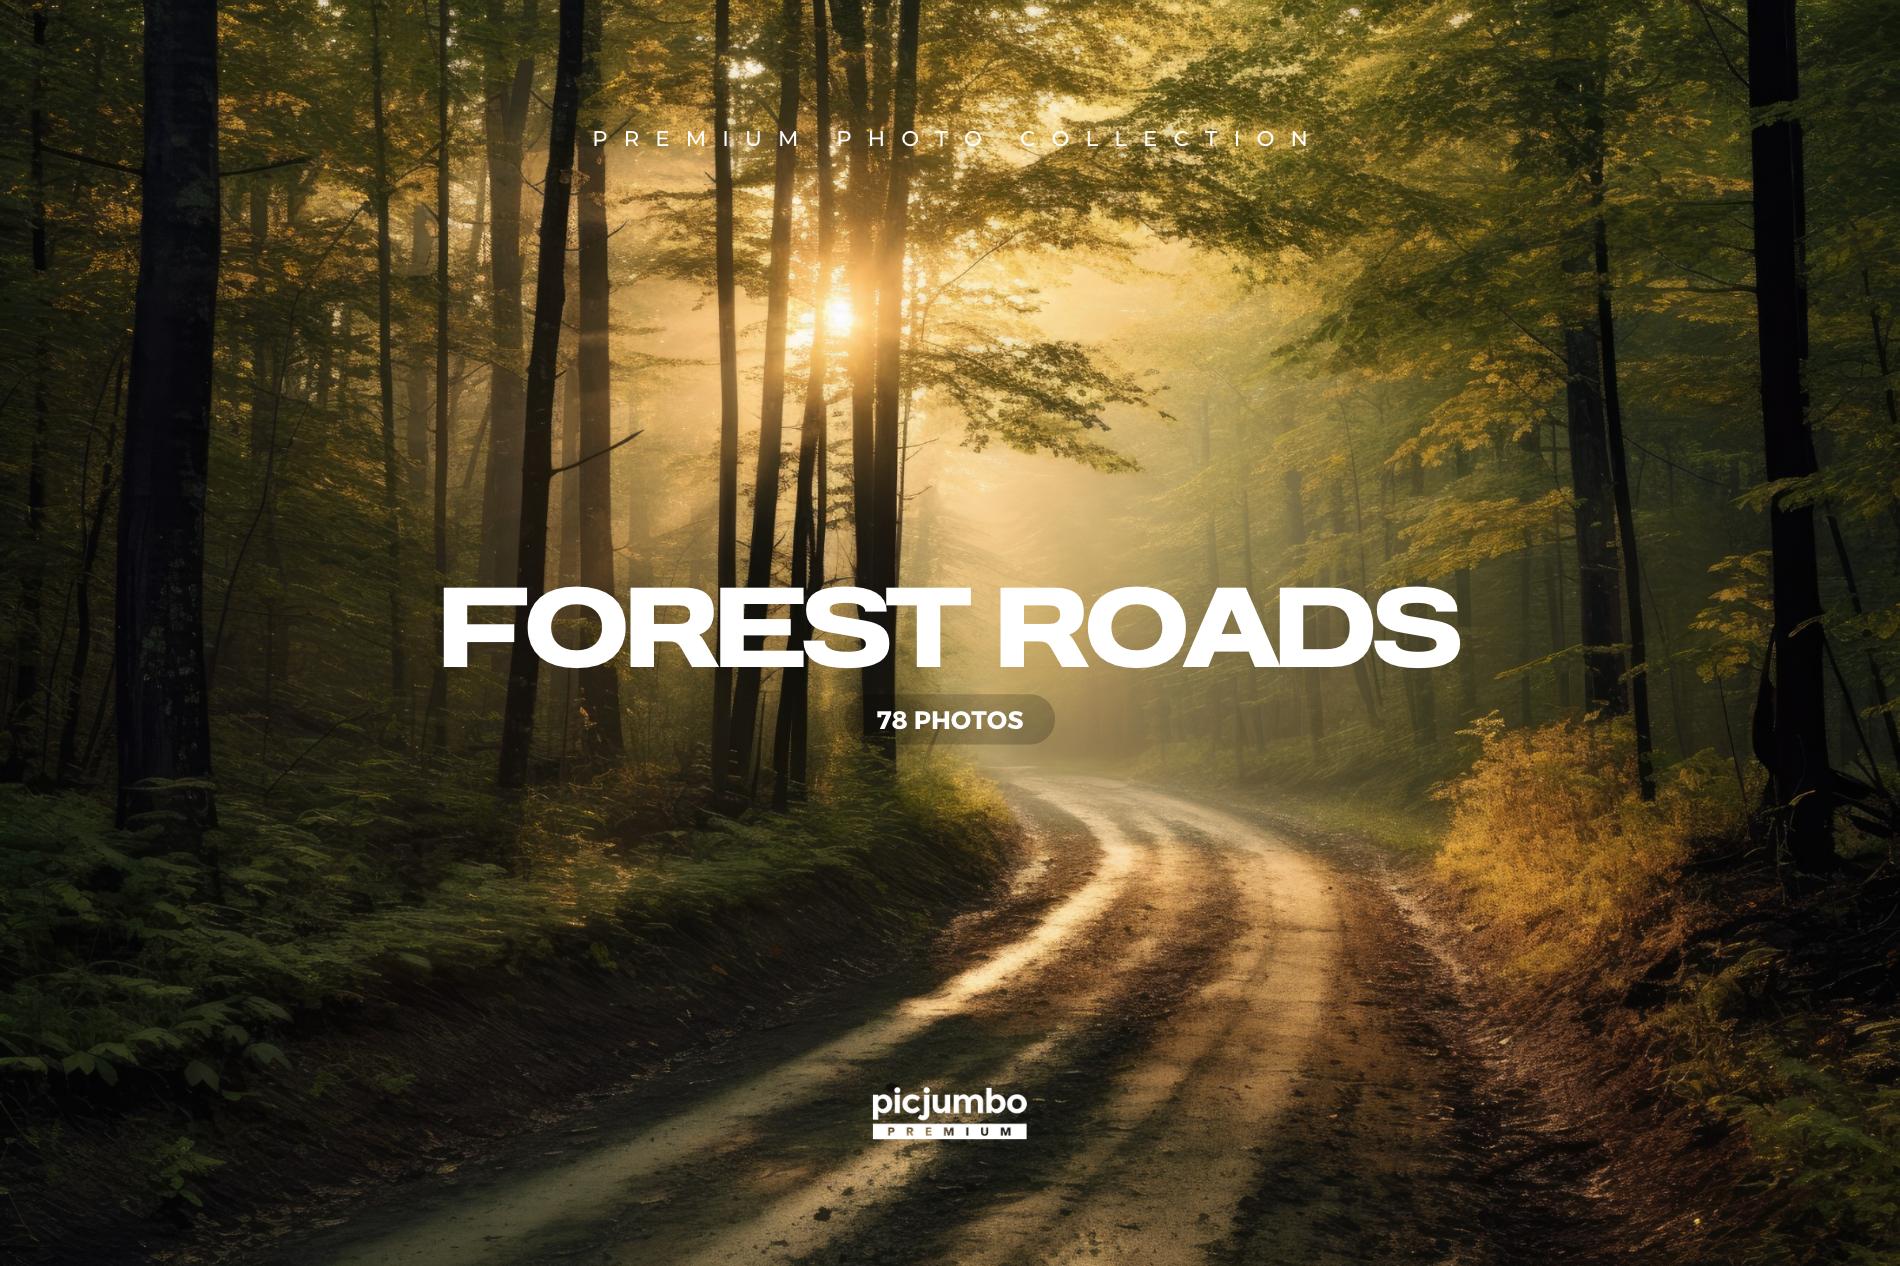 Download hi-res stock photos from our Forest Roads PREMIUM Collection!